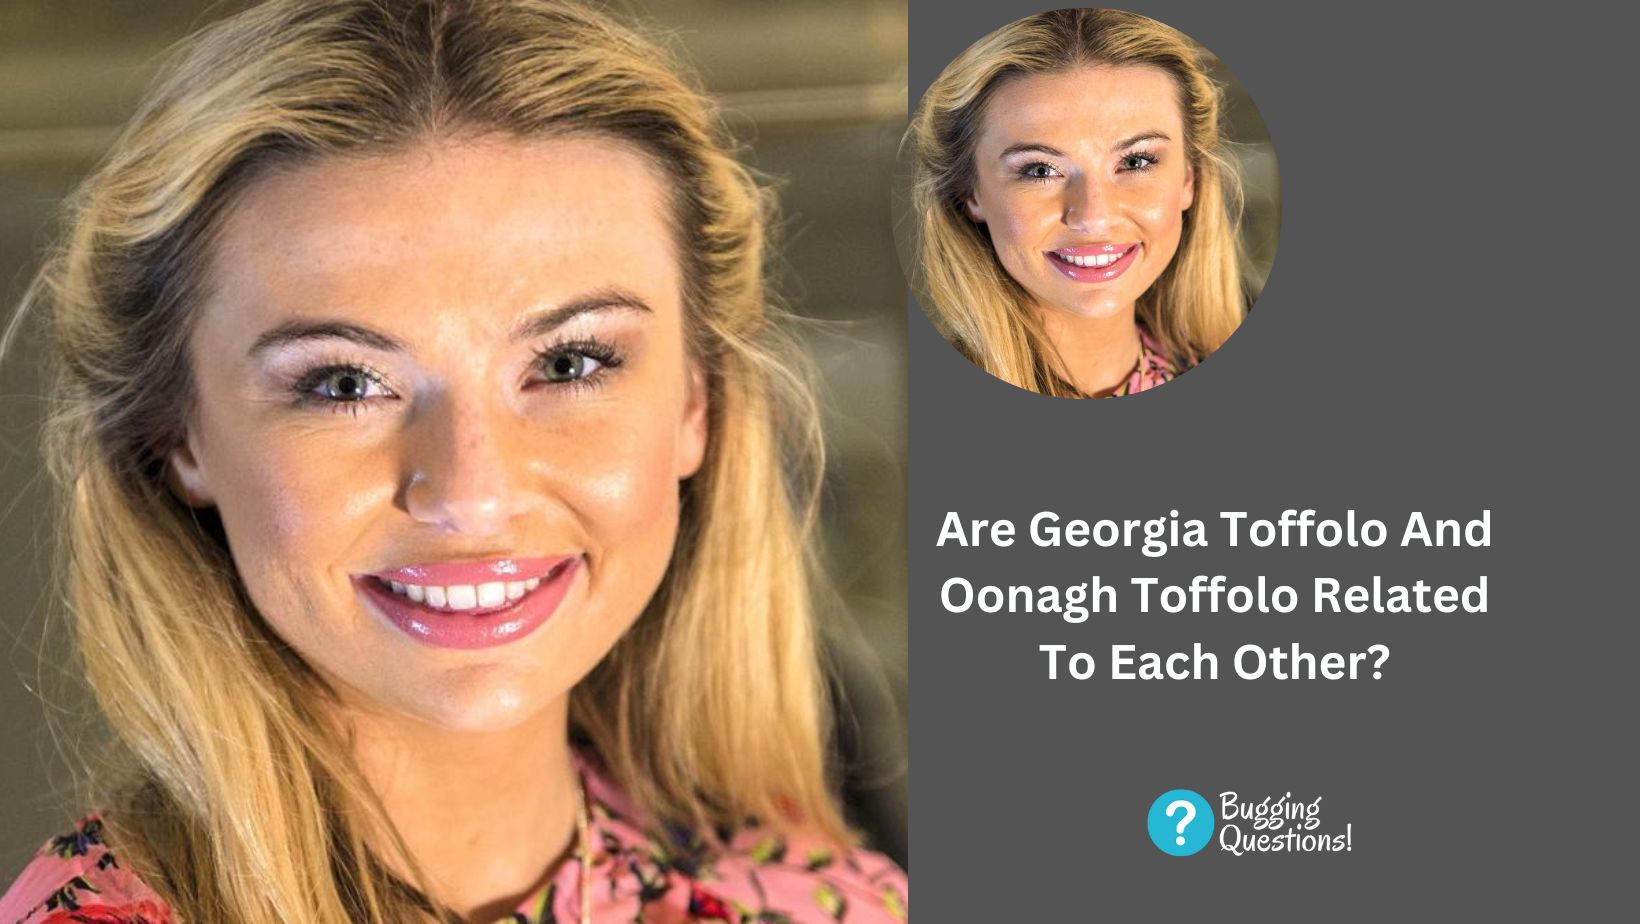 Are Georgia Toffolo And Oonagh Toffolo Related To Each Other?